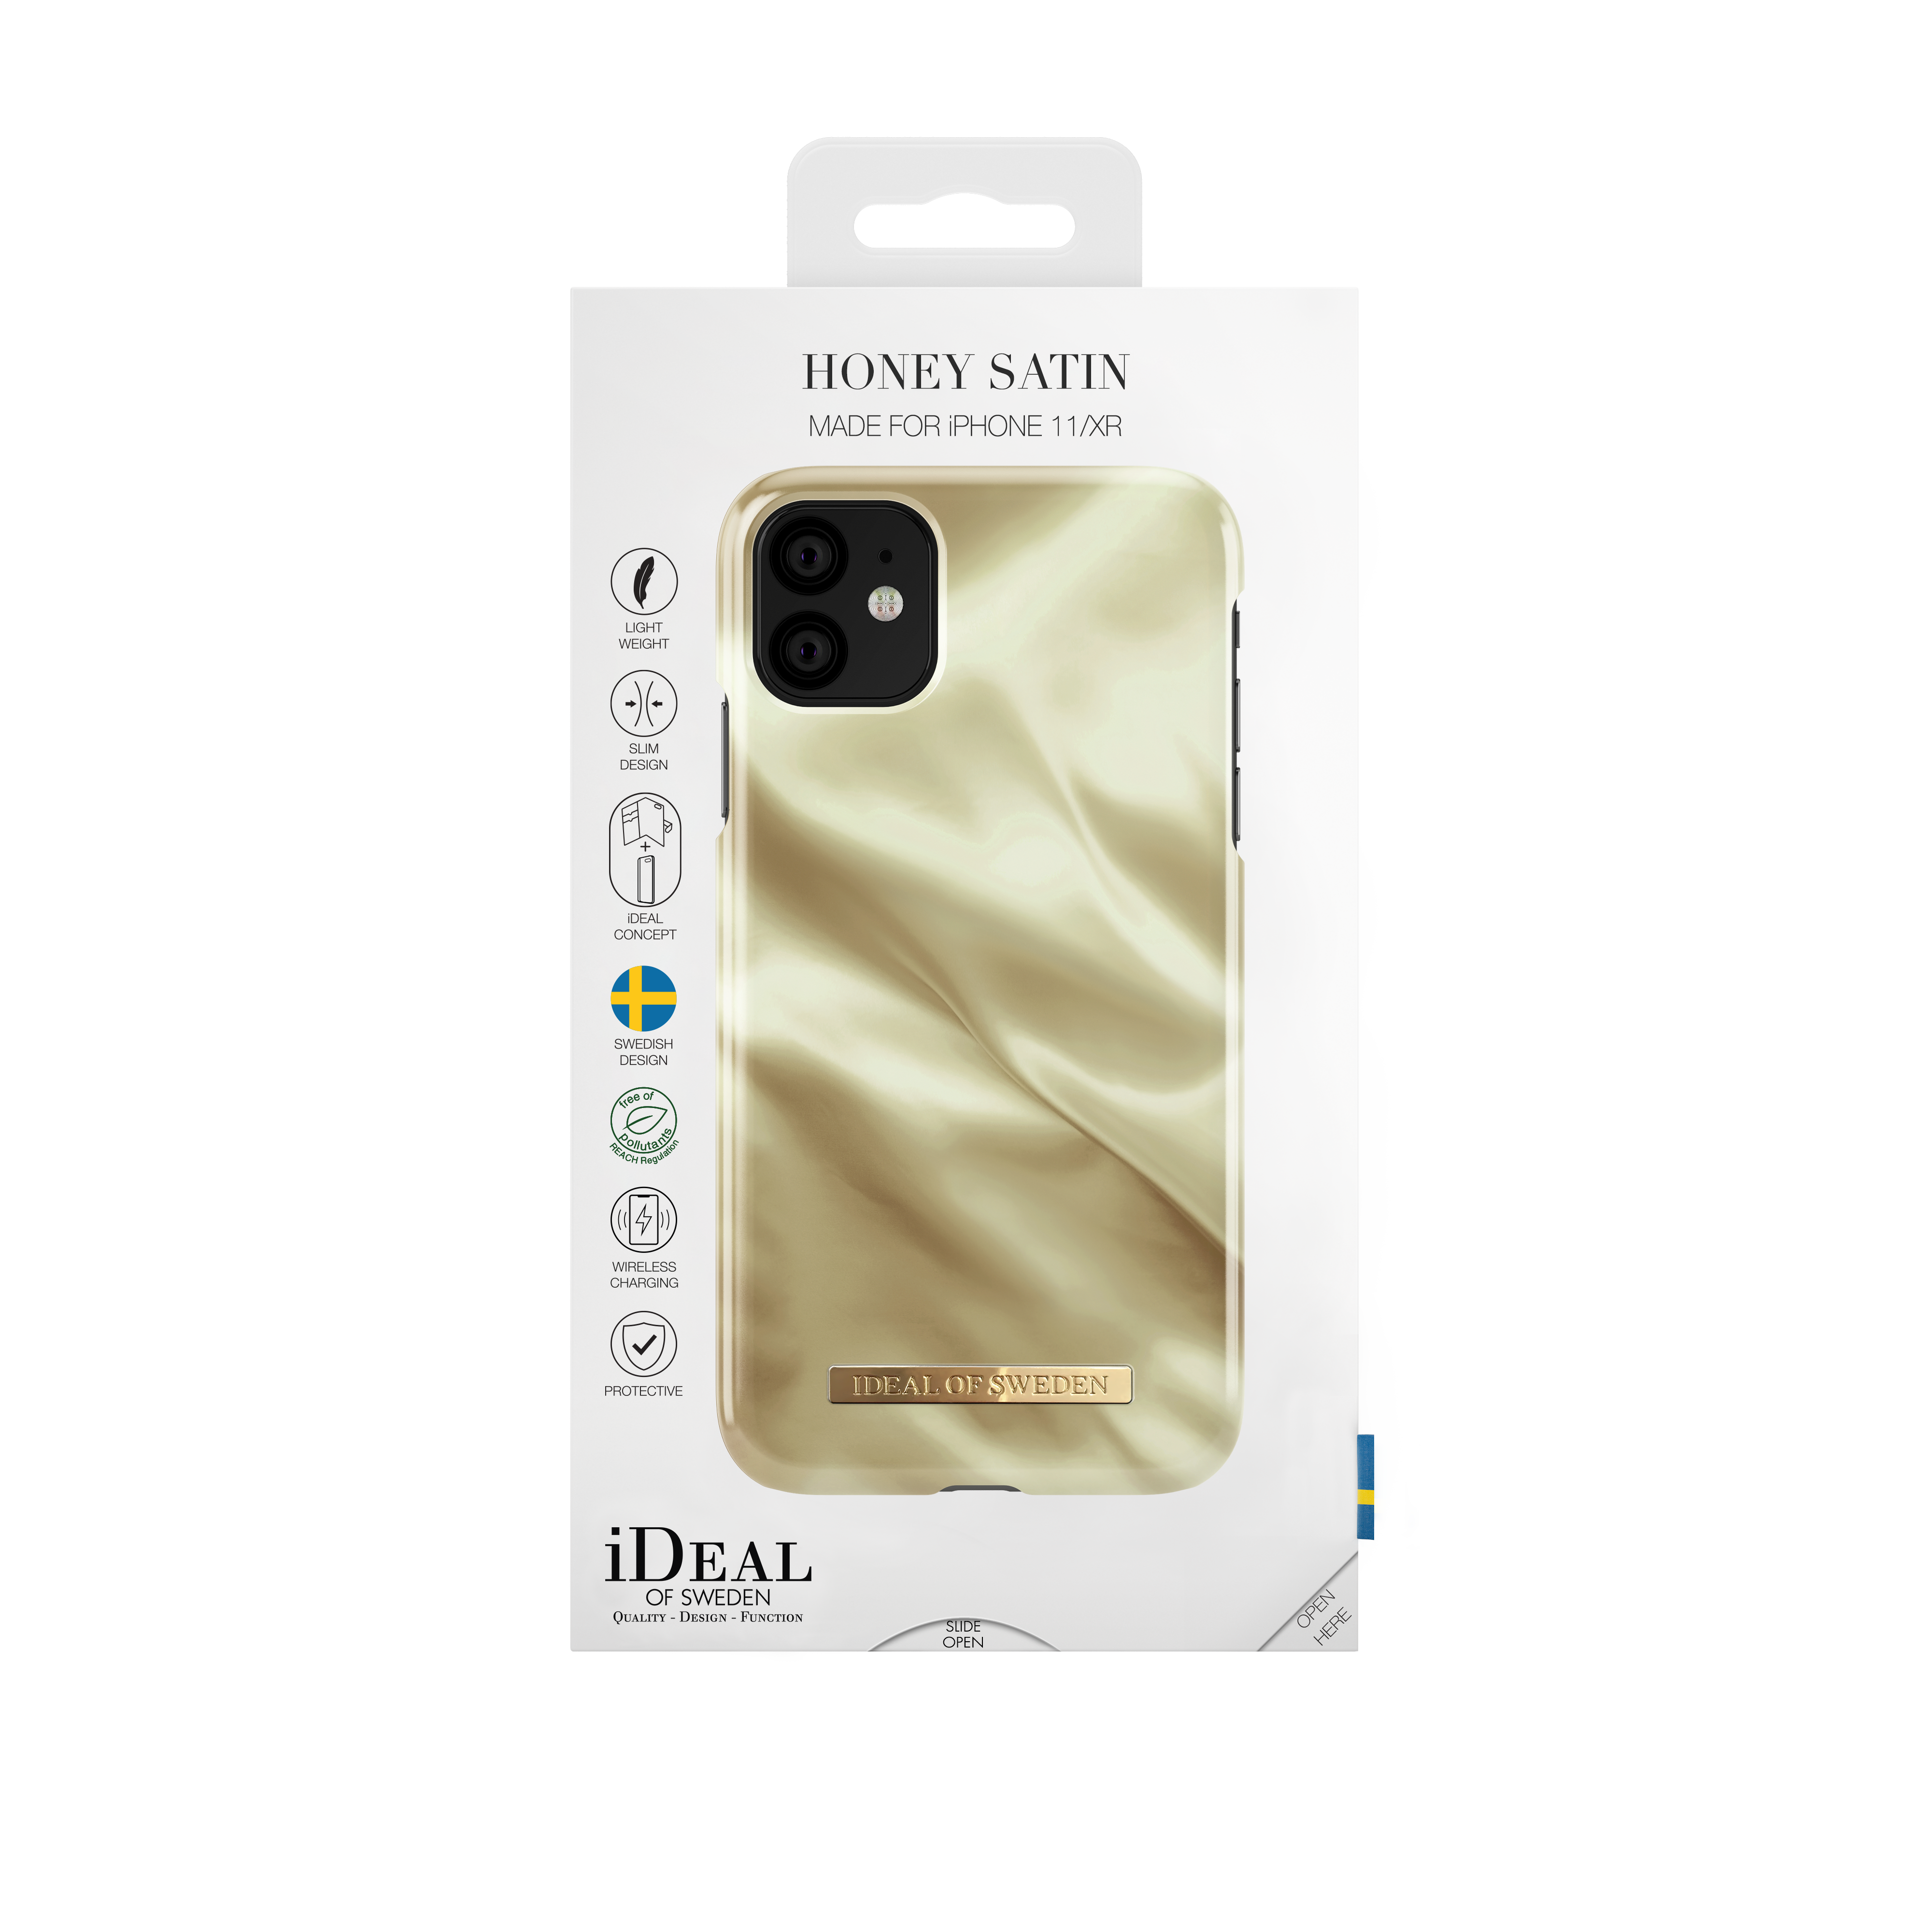 Pistachio IDFCSC19-I1961-189, Satin SWEDEN Backcover, iPhone OF IDEAL 11, iPhone XR, Apple,